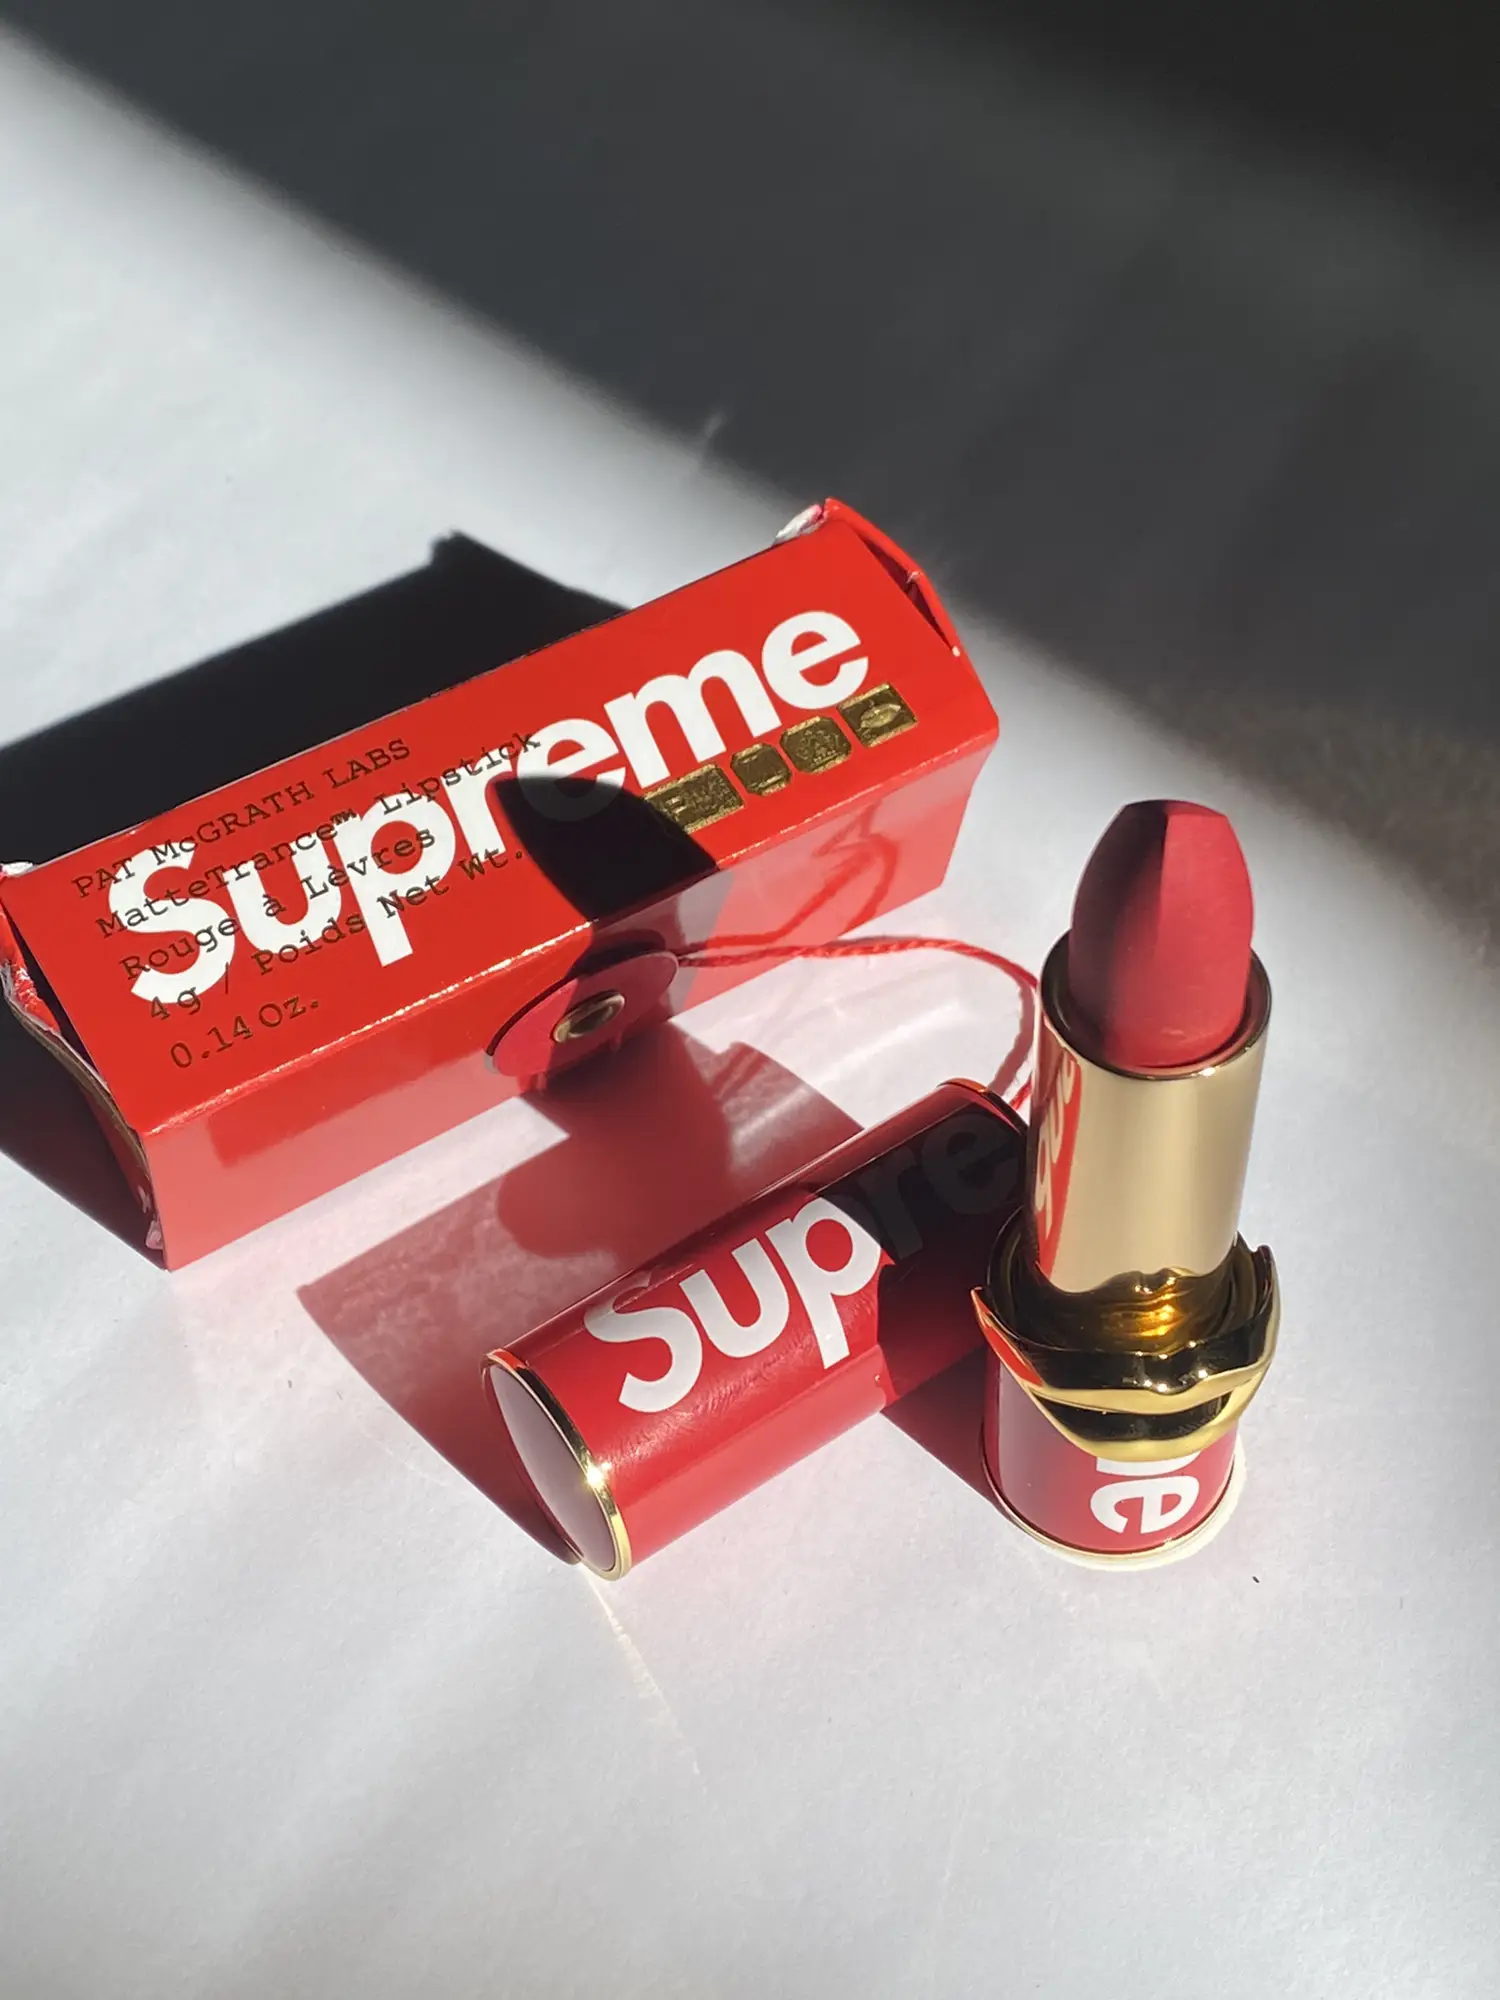 Supreme × Pat McGrath Red Lipstick | Gallery posted by Chloe | Lemon8